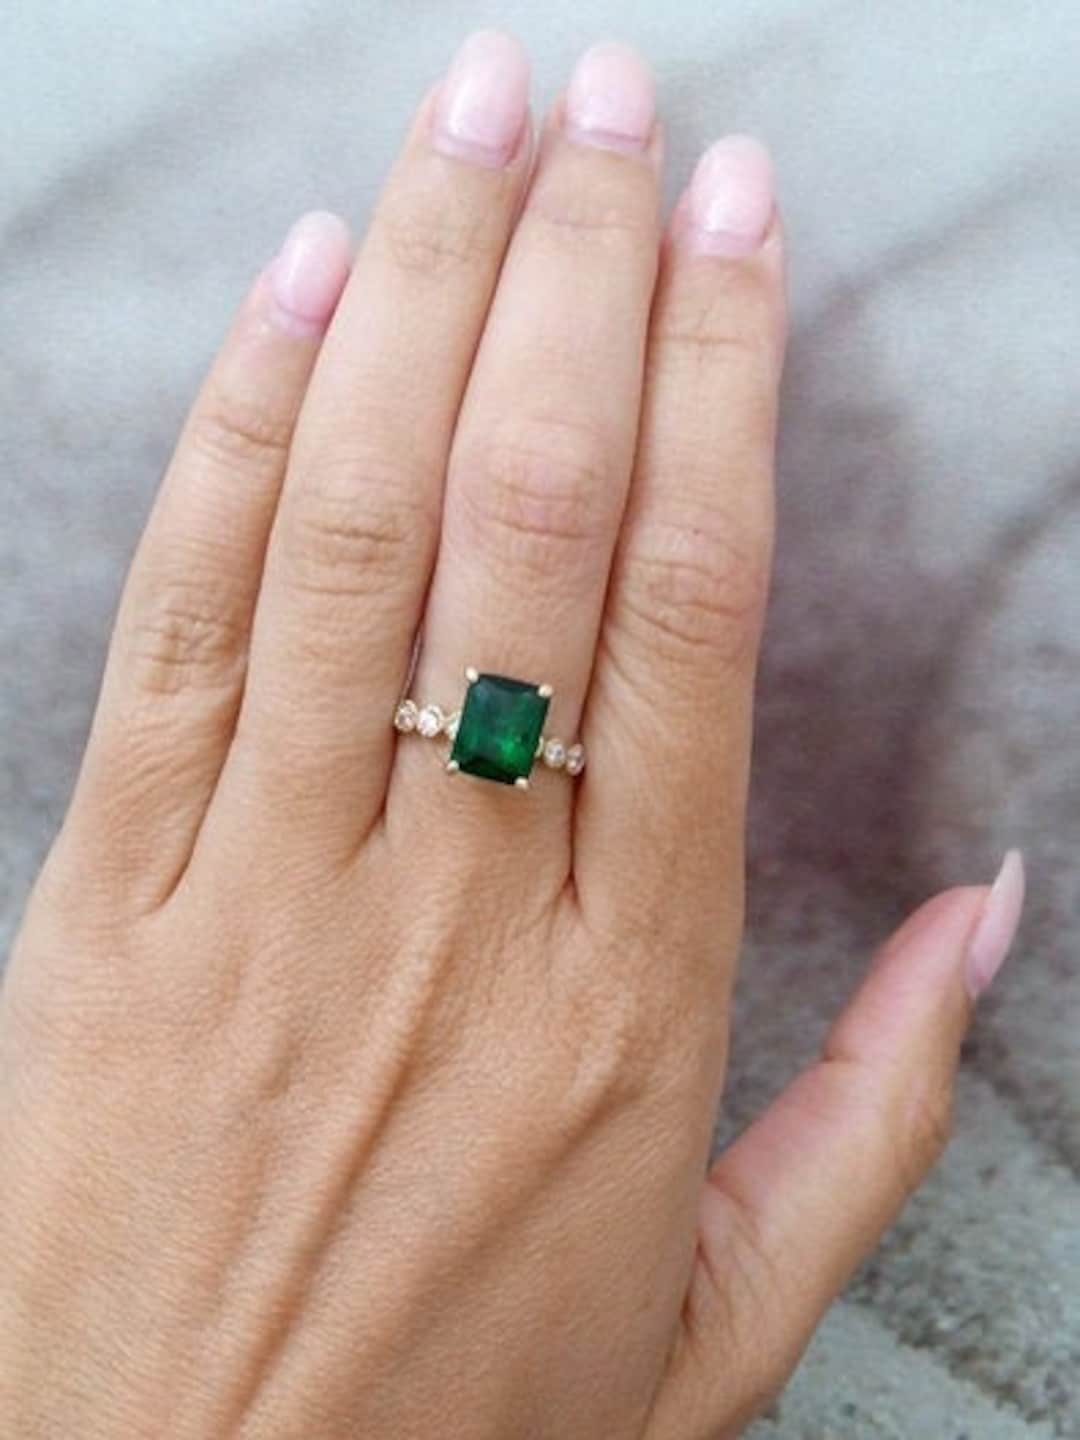 Buy Lab Emerald Ring, Emerald Engagement Ring, Solitaire Ring, Wedding Ring  in 925 Sterling Silver, Statement Ring for Men and Women Online in India -  Etsy